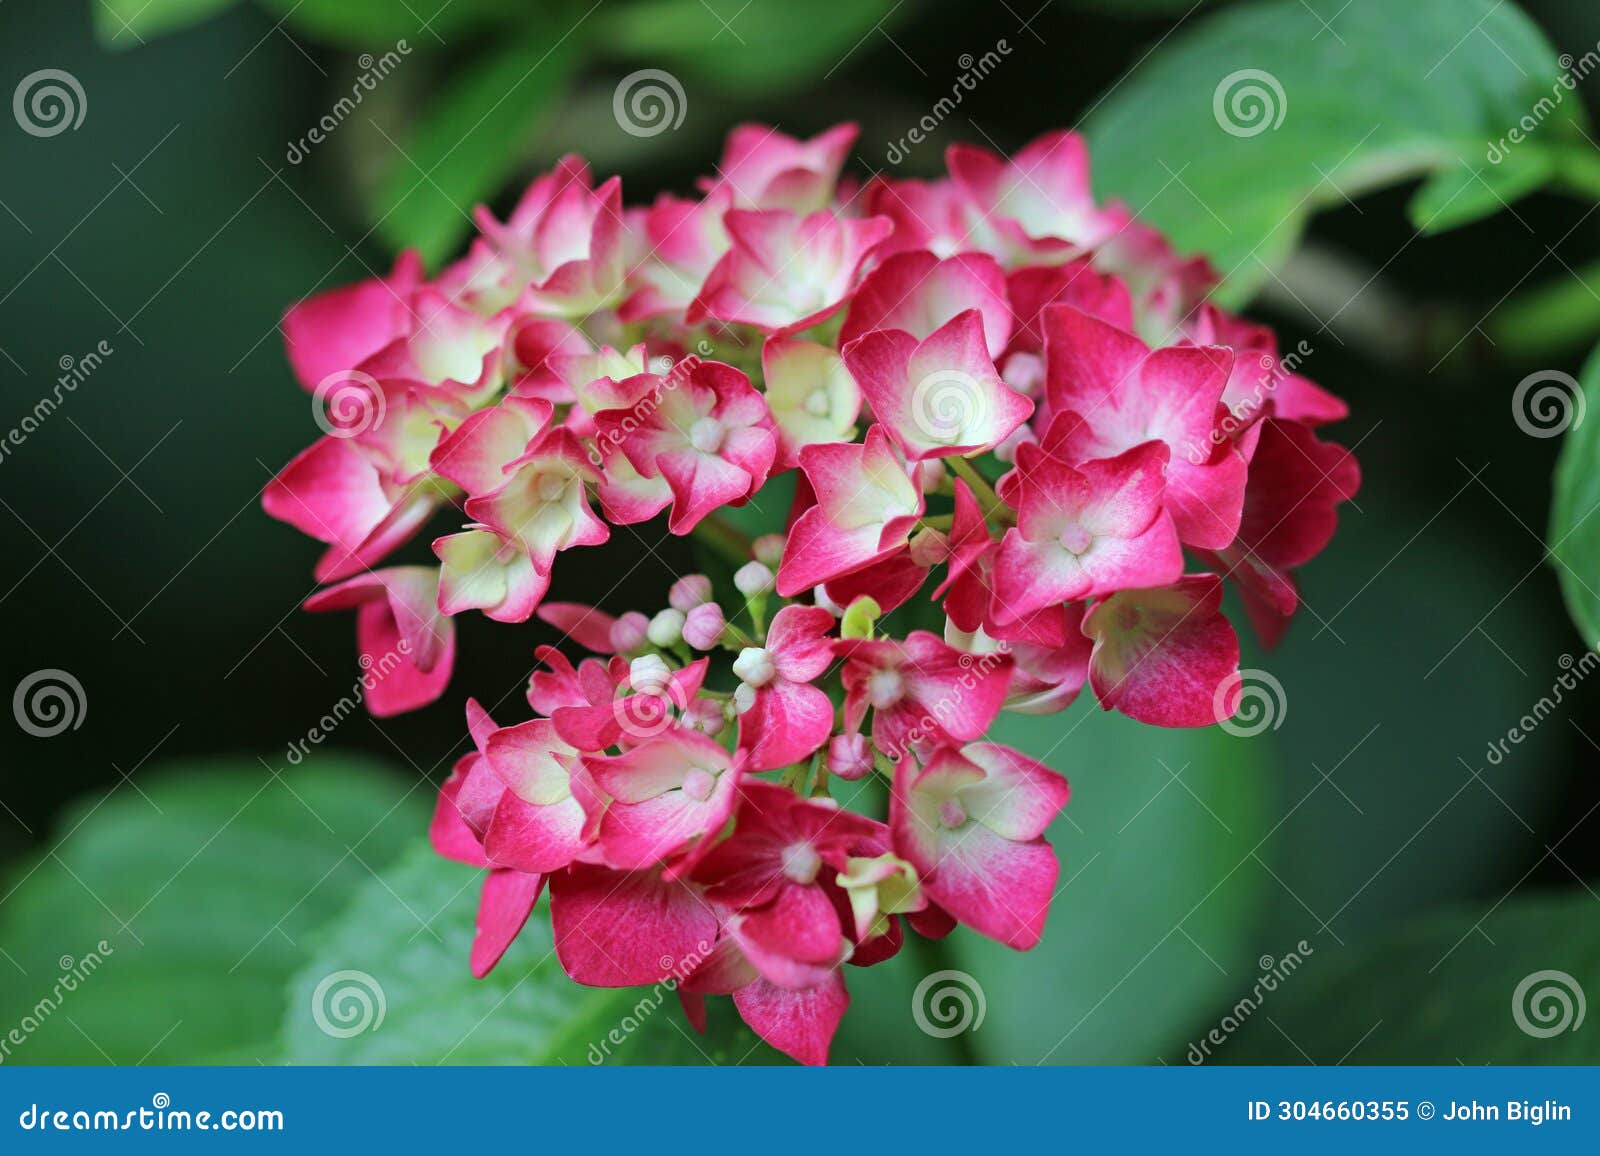 pink mophead hydrangea flowers in close up